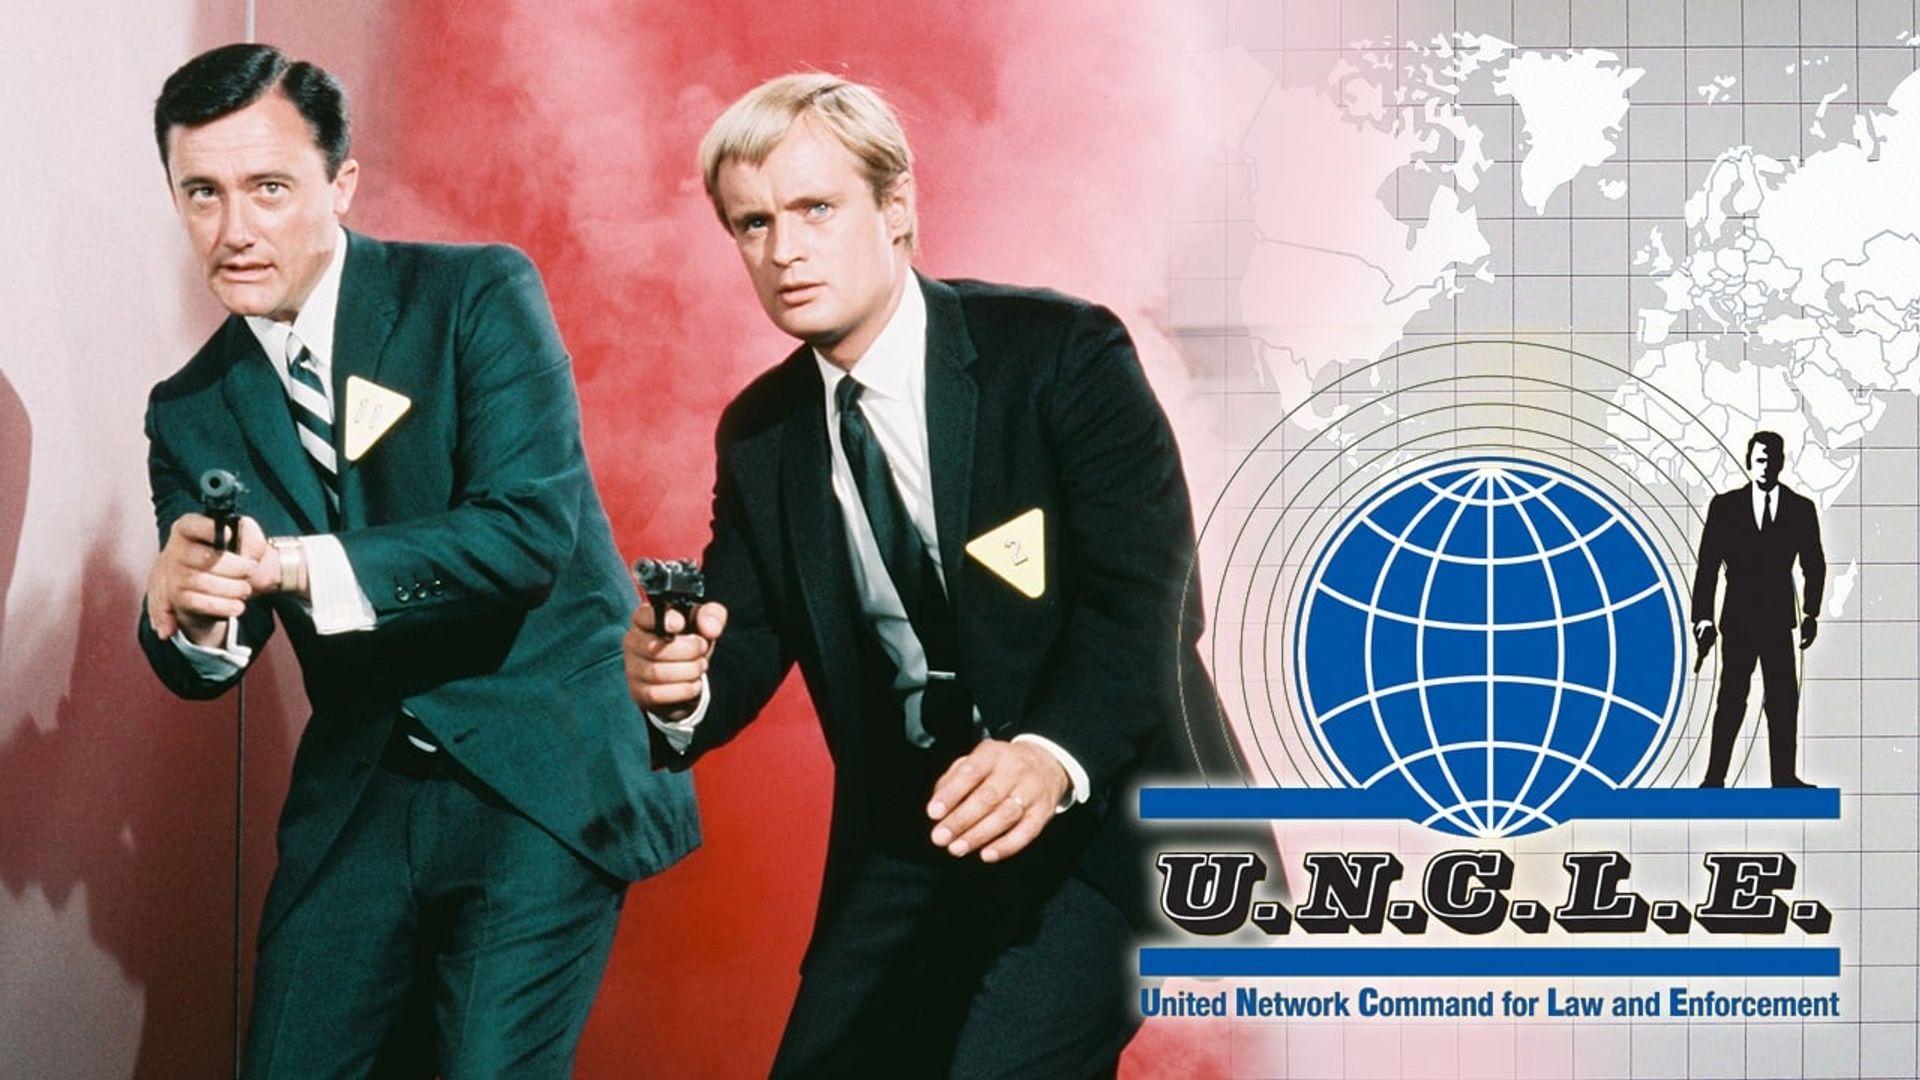 The Man from U.N.C.L.E. background